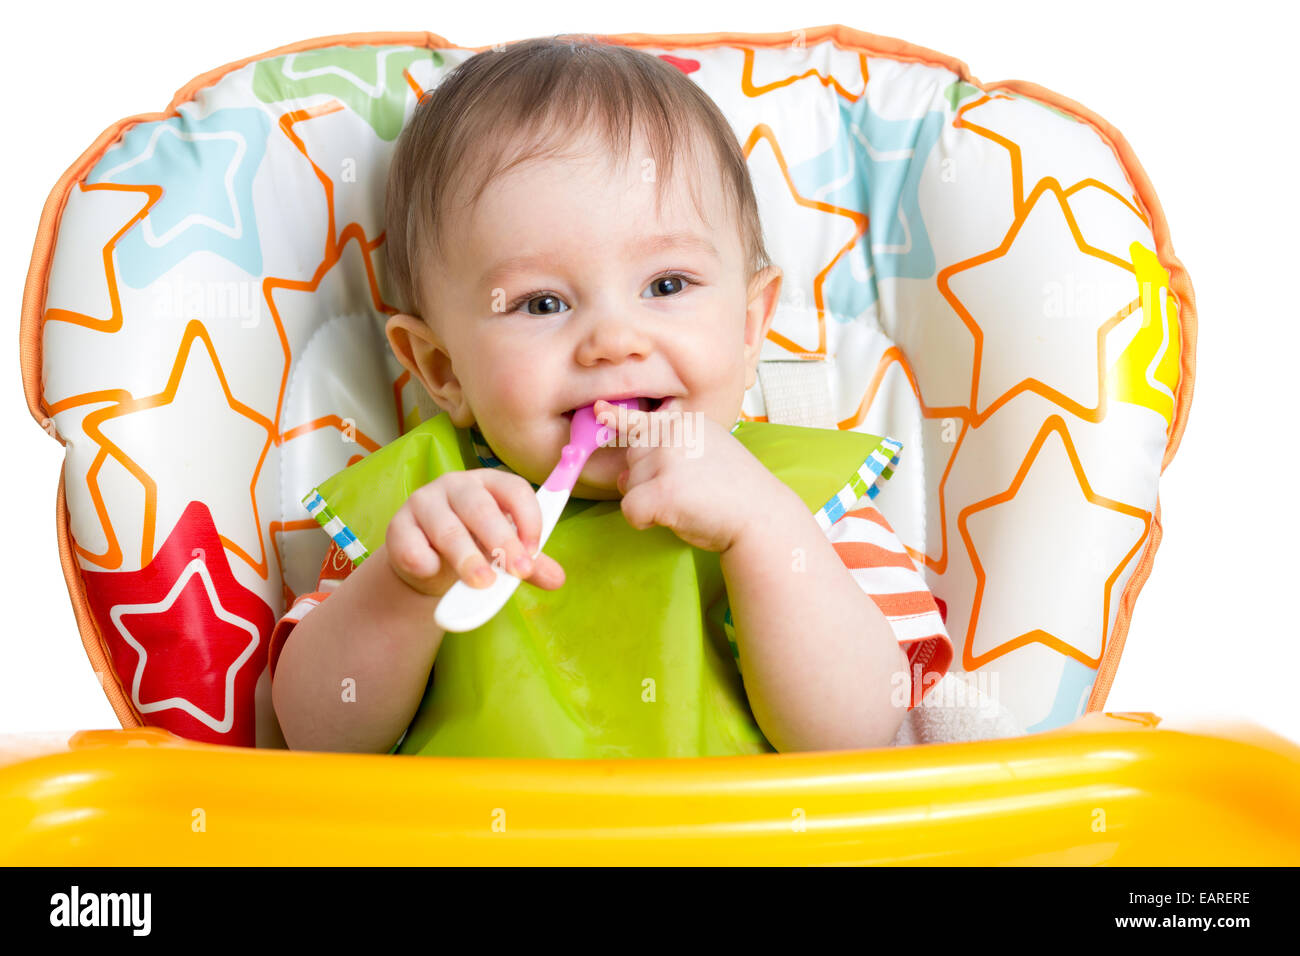 Happy Baby Child Sitting In Chair With A Spoon Stock Photo Alamy